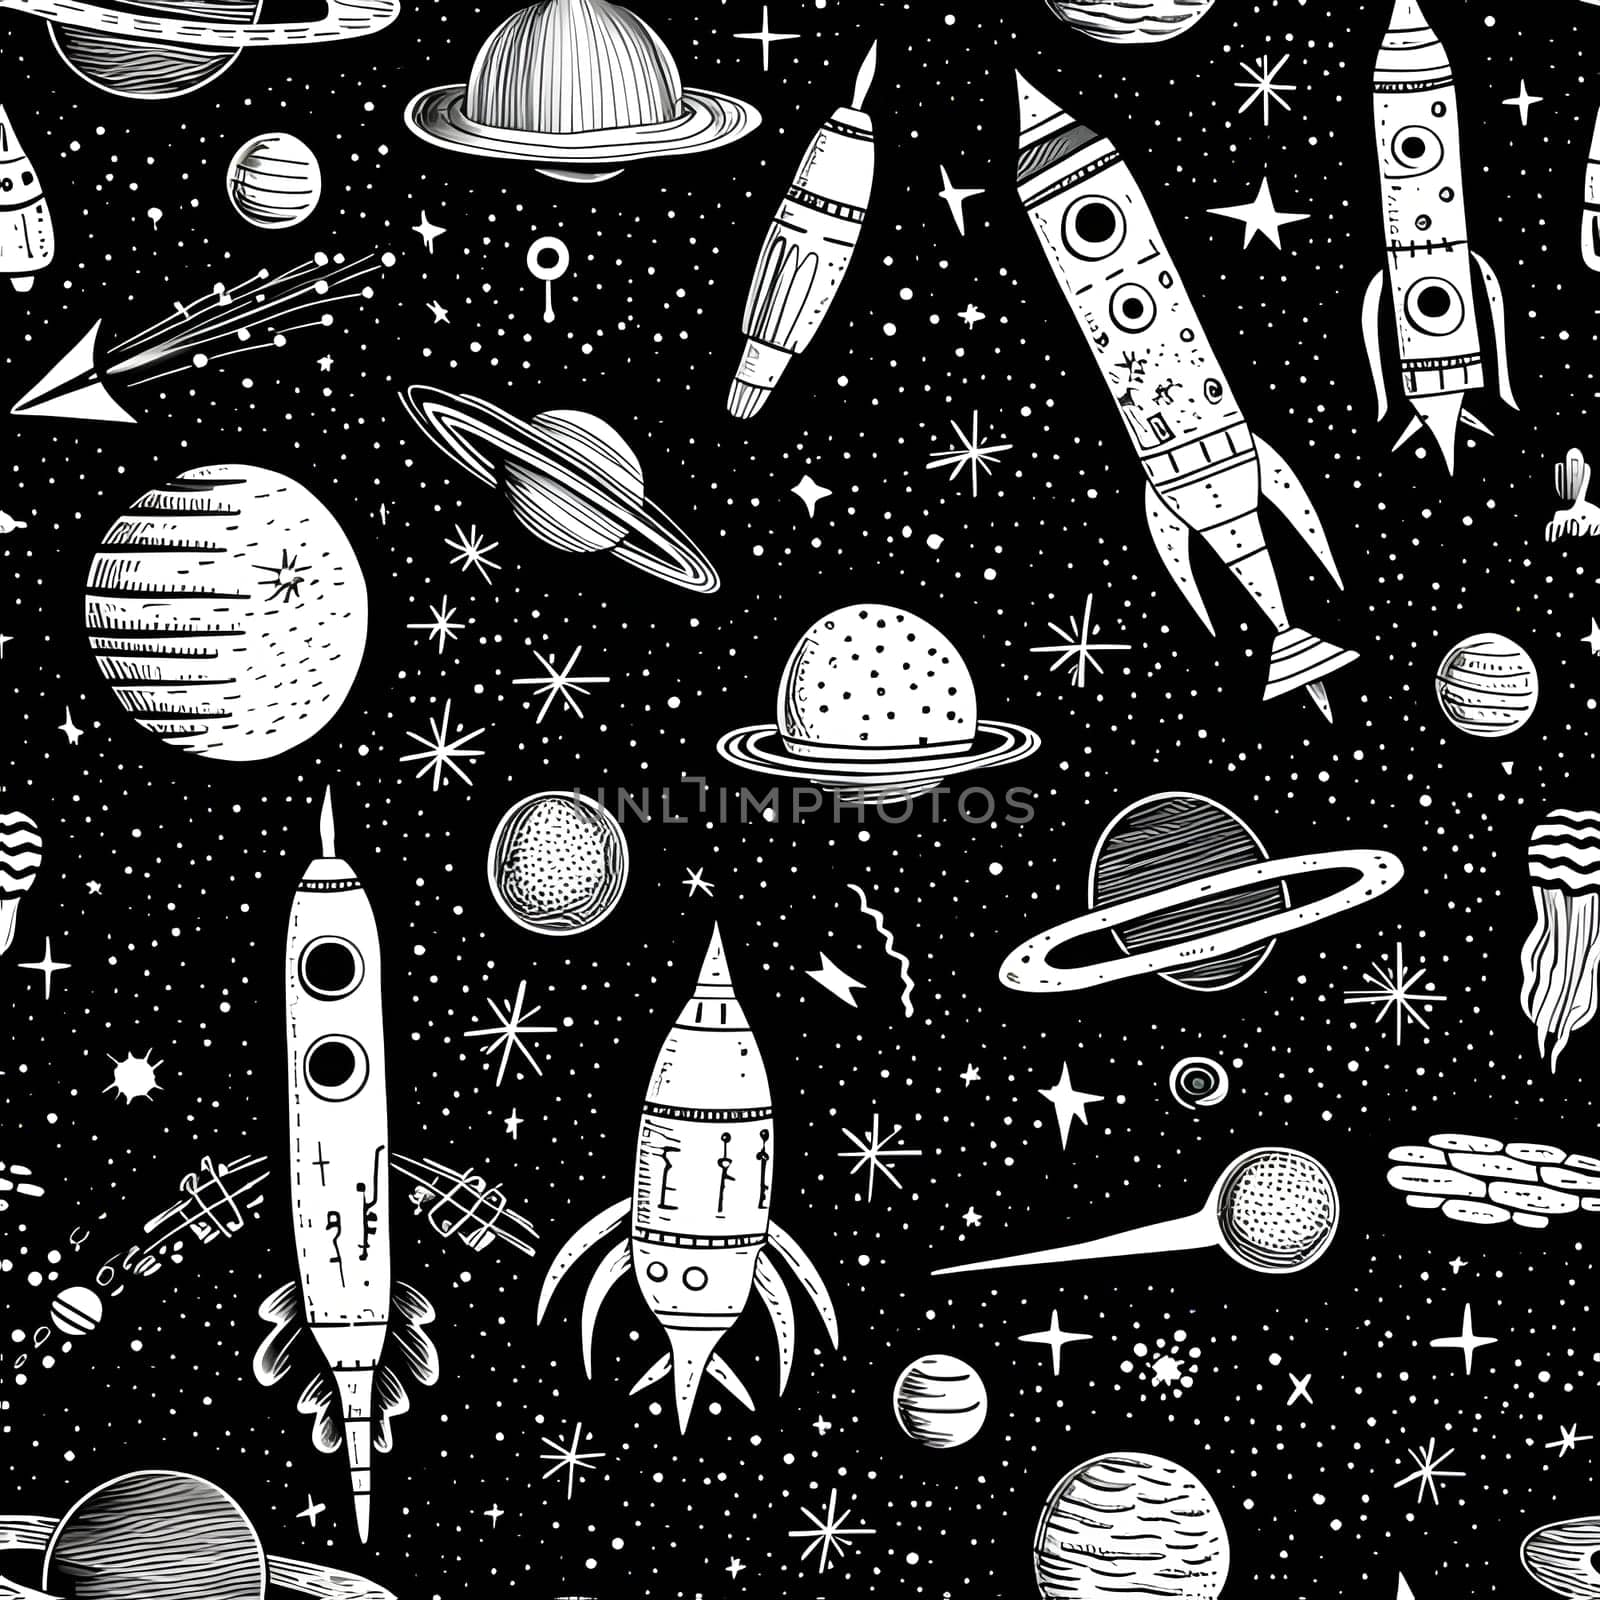 Patterns and banners backgrounds: Seamless pattern with planets, stars and rockets. Vector illustration